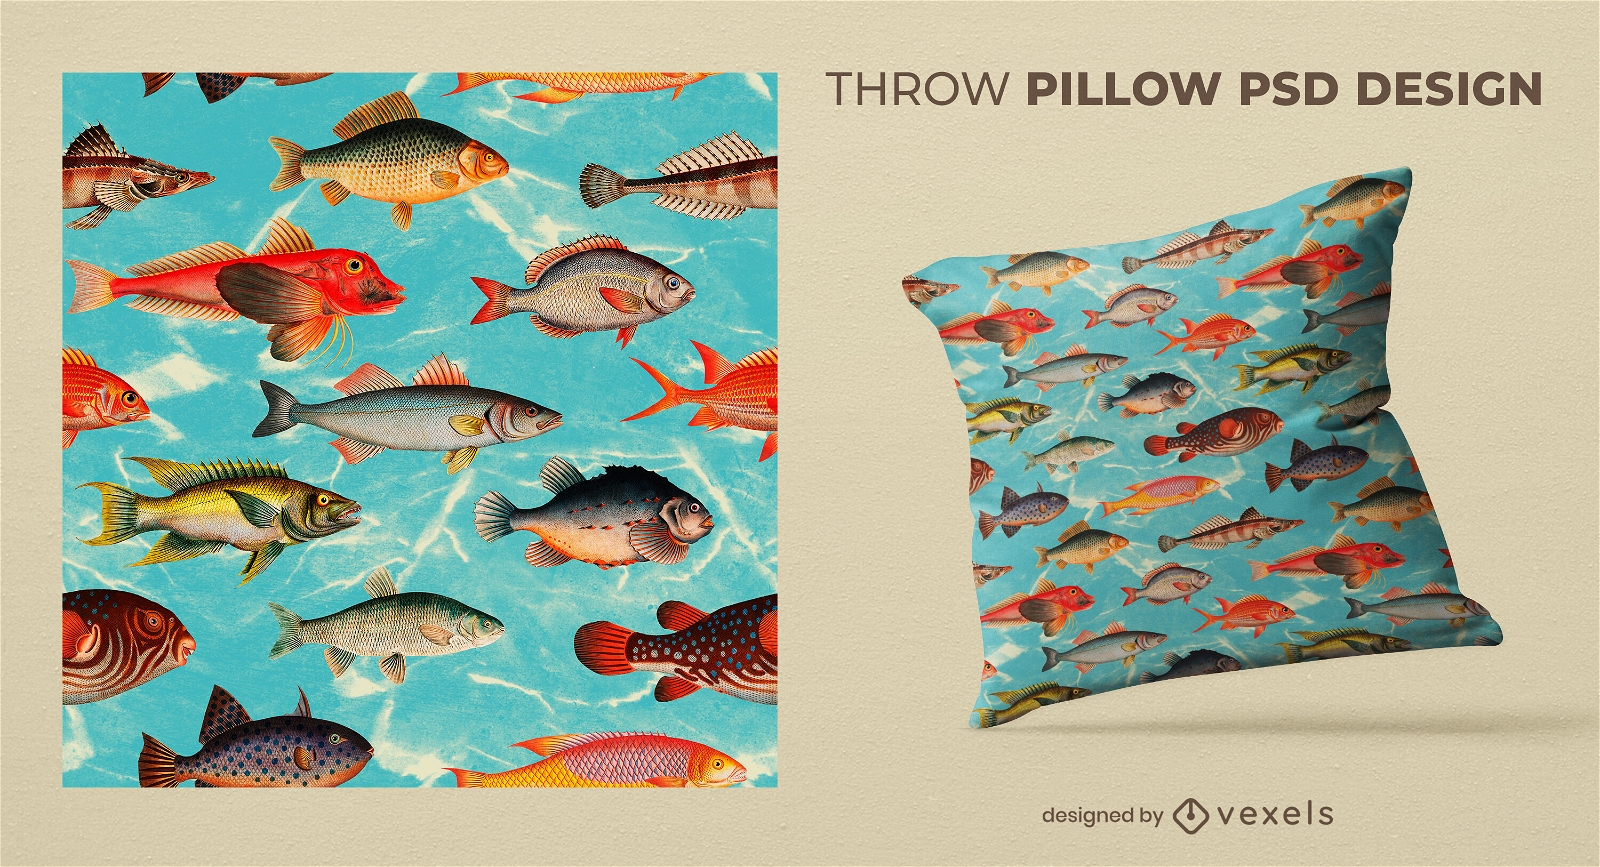 Fishes swimming in the ocean throw pillow design